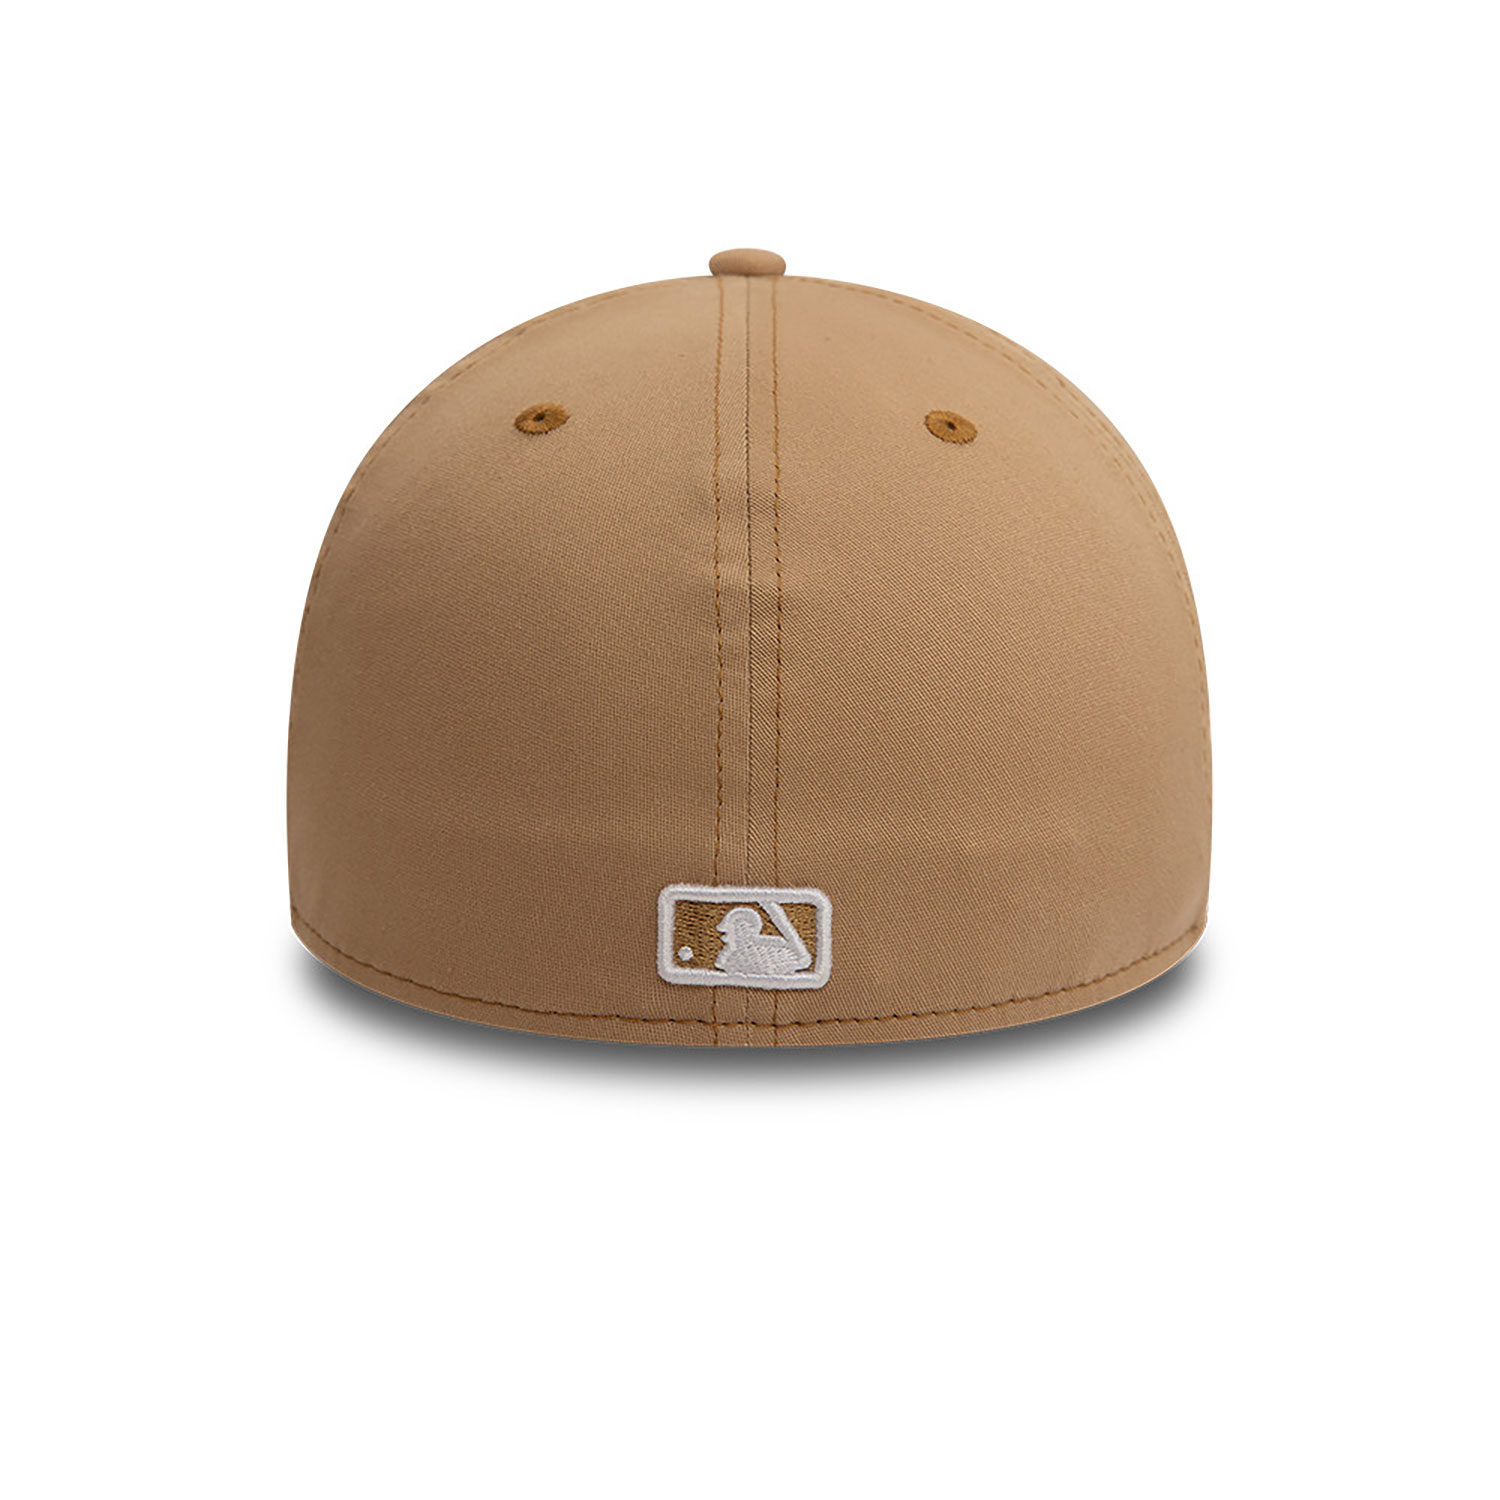 New York Yankees League Essential Beige 39THIRTY A-Frame Stretch Fit Cap